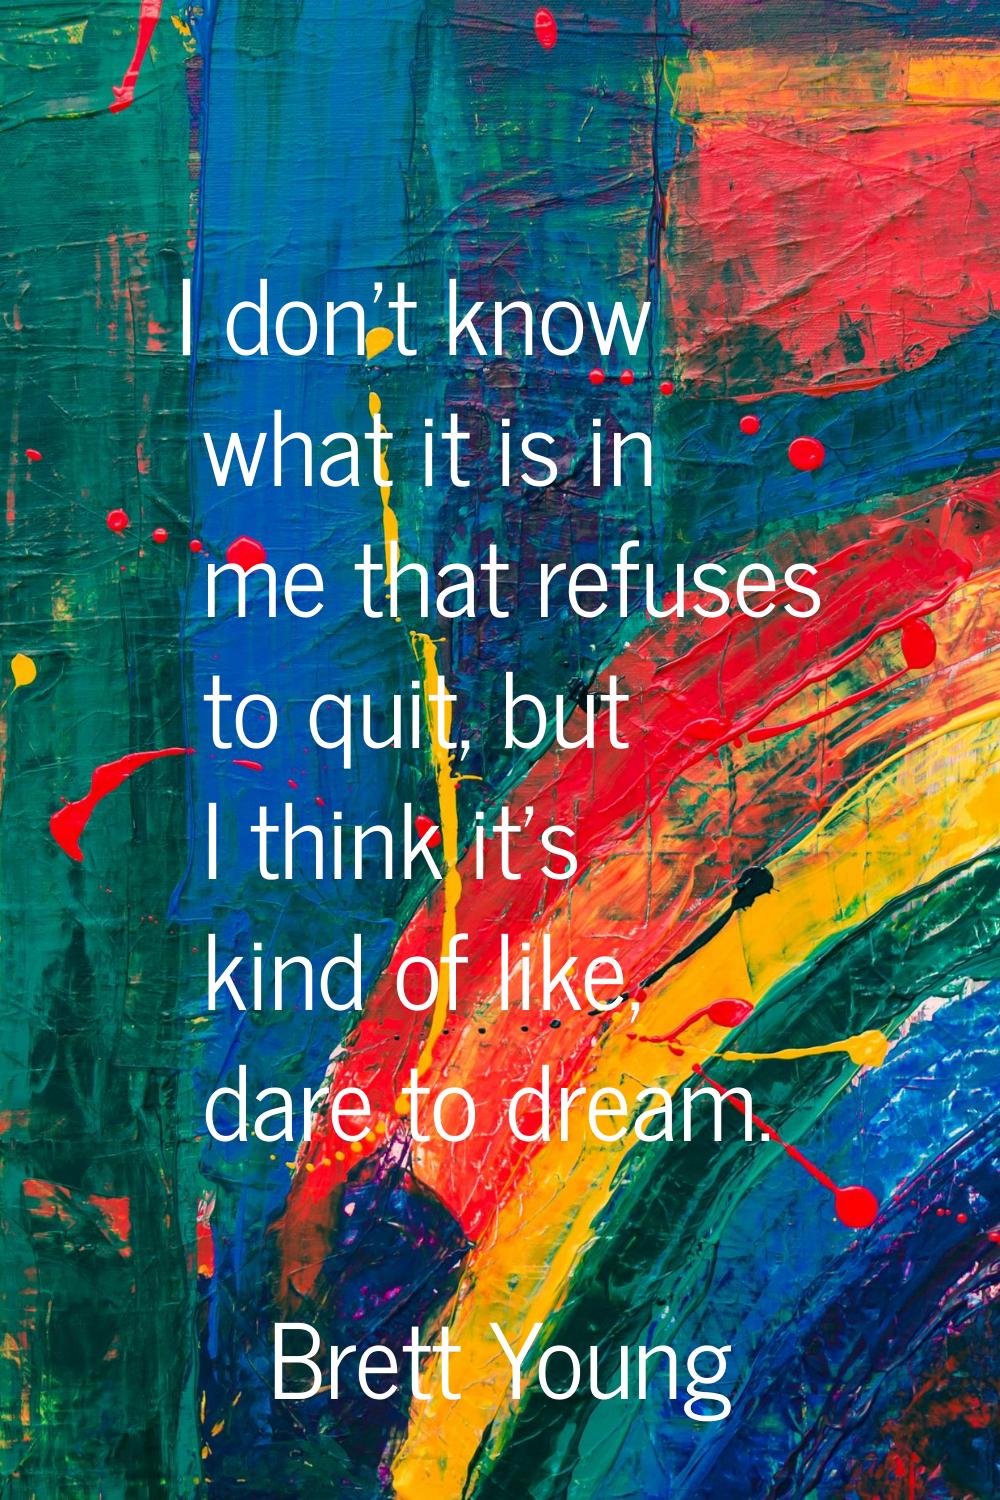 I don't know what it is in me that refuses to quit, but I think it's kind of like, dare to dream.